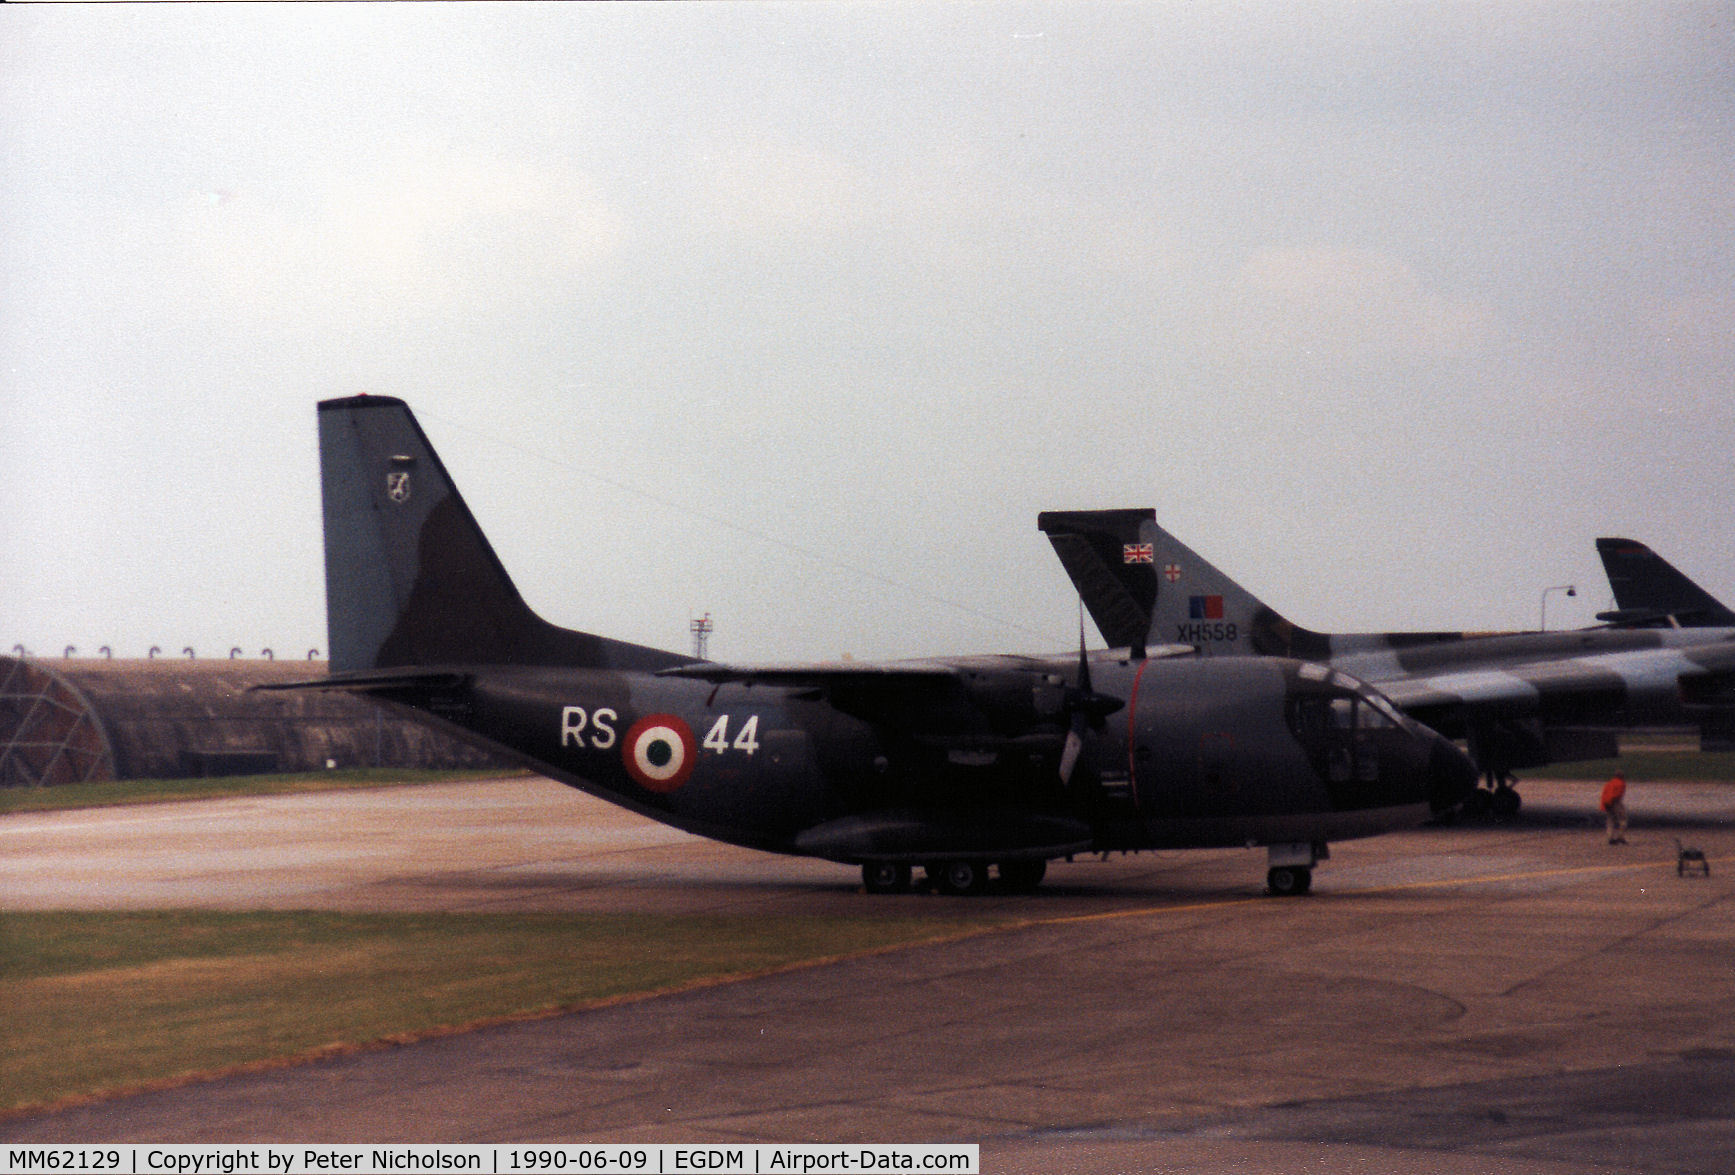 MM62129, Aeritalia G-222TCM C/N 4036, Another view of the RSV G.222TCM on the flight-line at the 1990 Boscombe Down Battle of Britain 50th Anniversary Airshow.